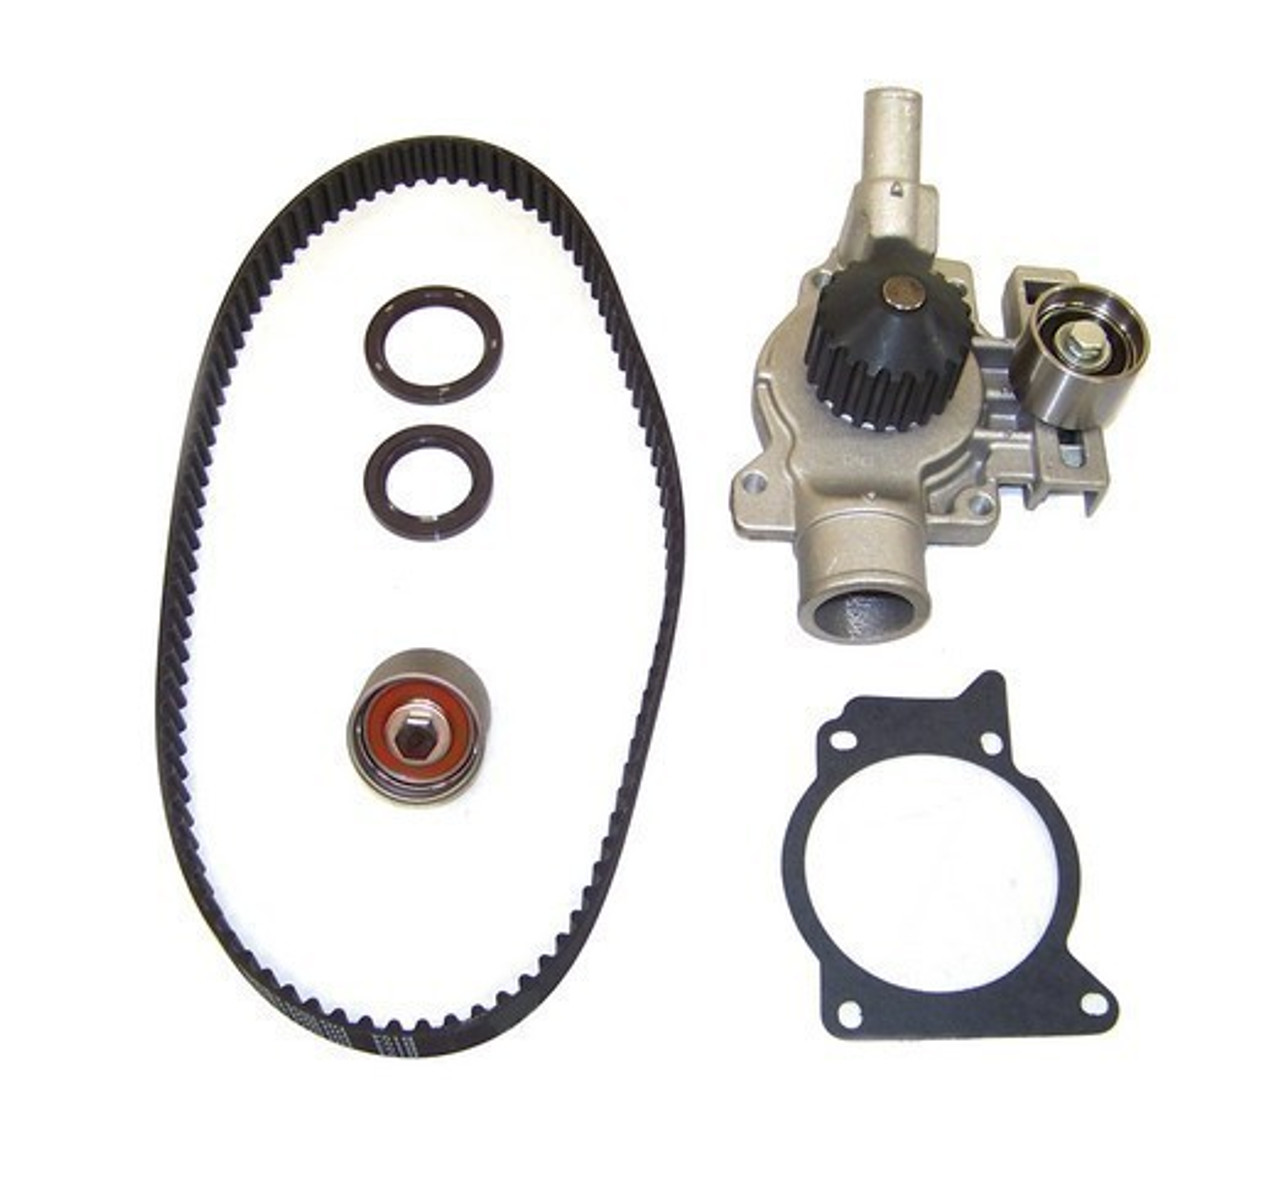 1992 Mercury Tracer 1.9L Engine Timing Belt Kit with Water Pump TBK4125WP -6